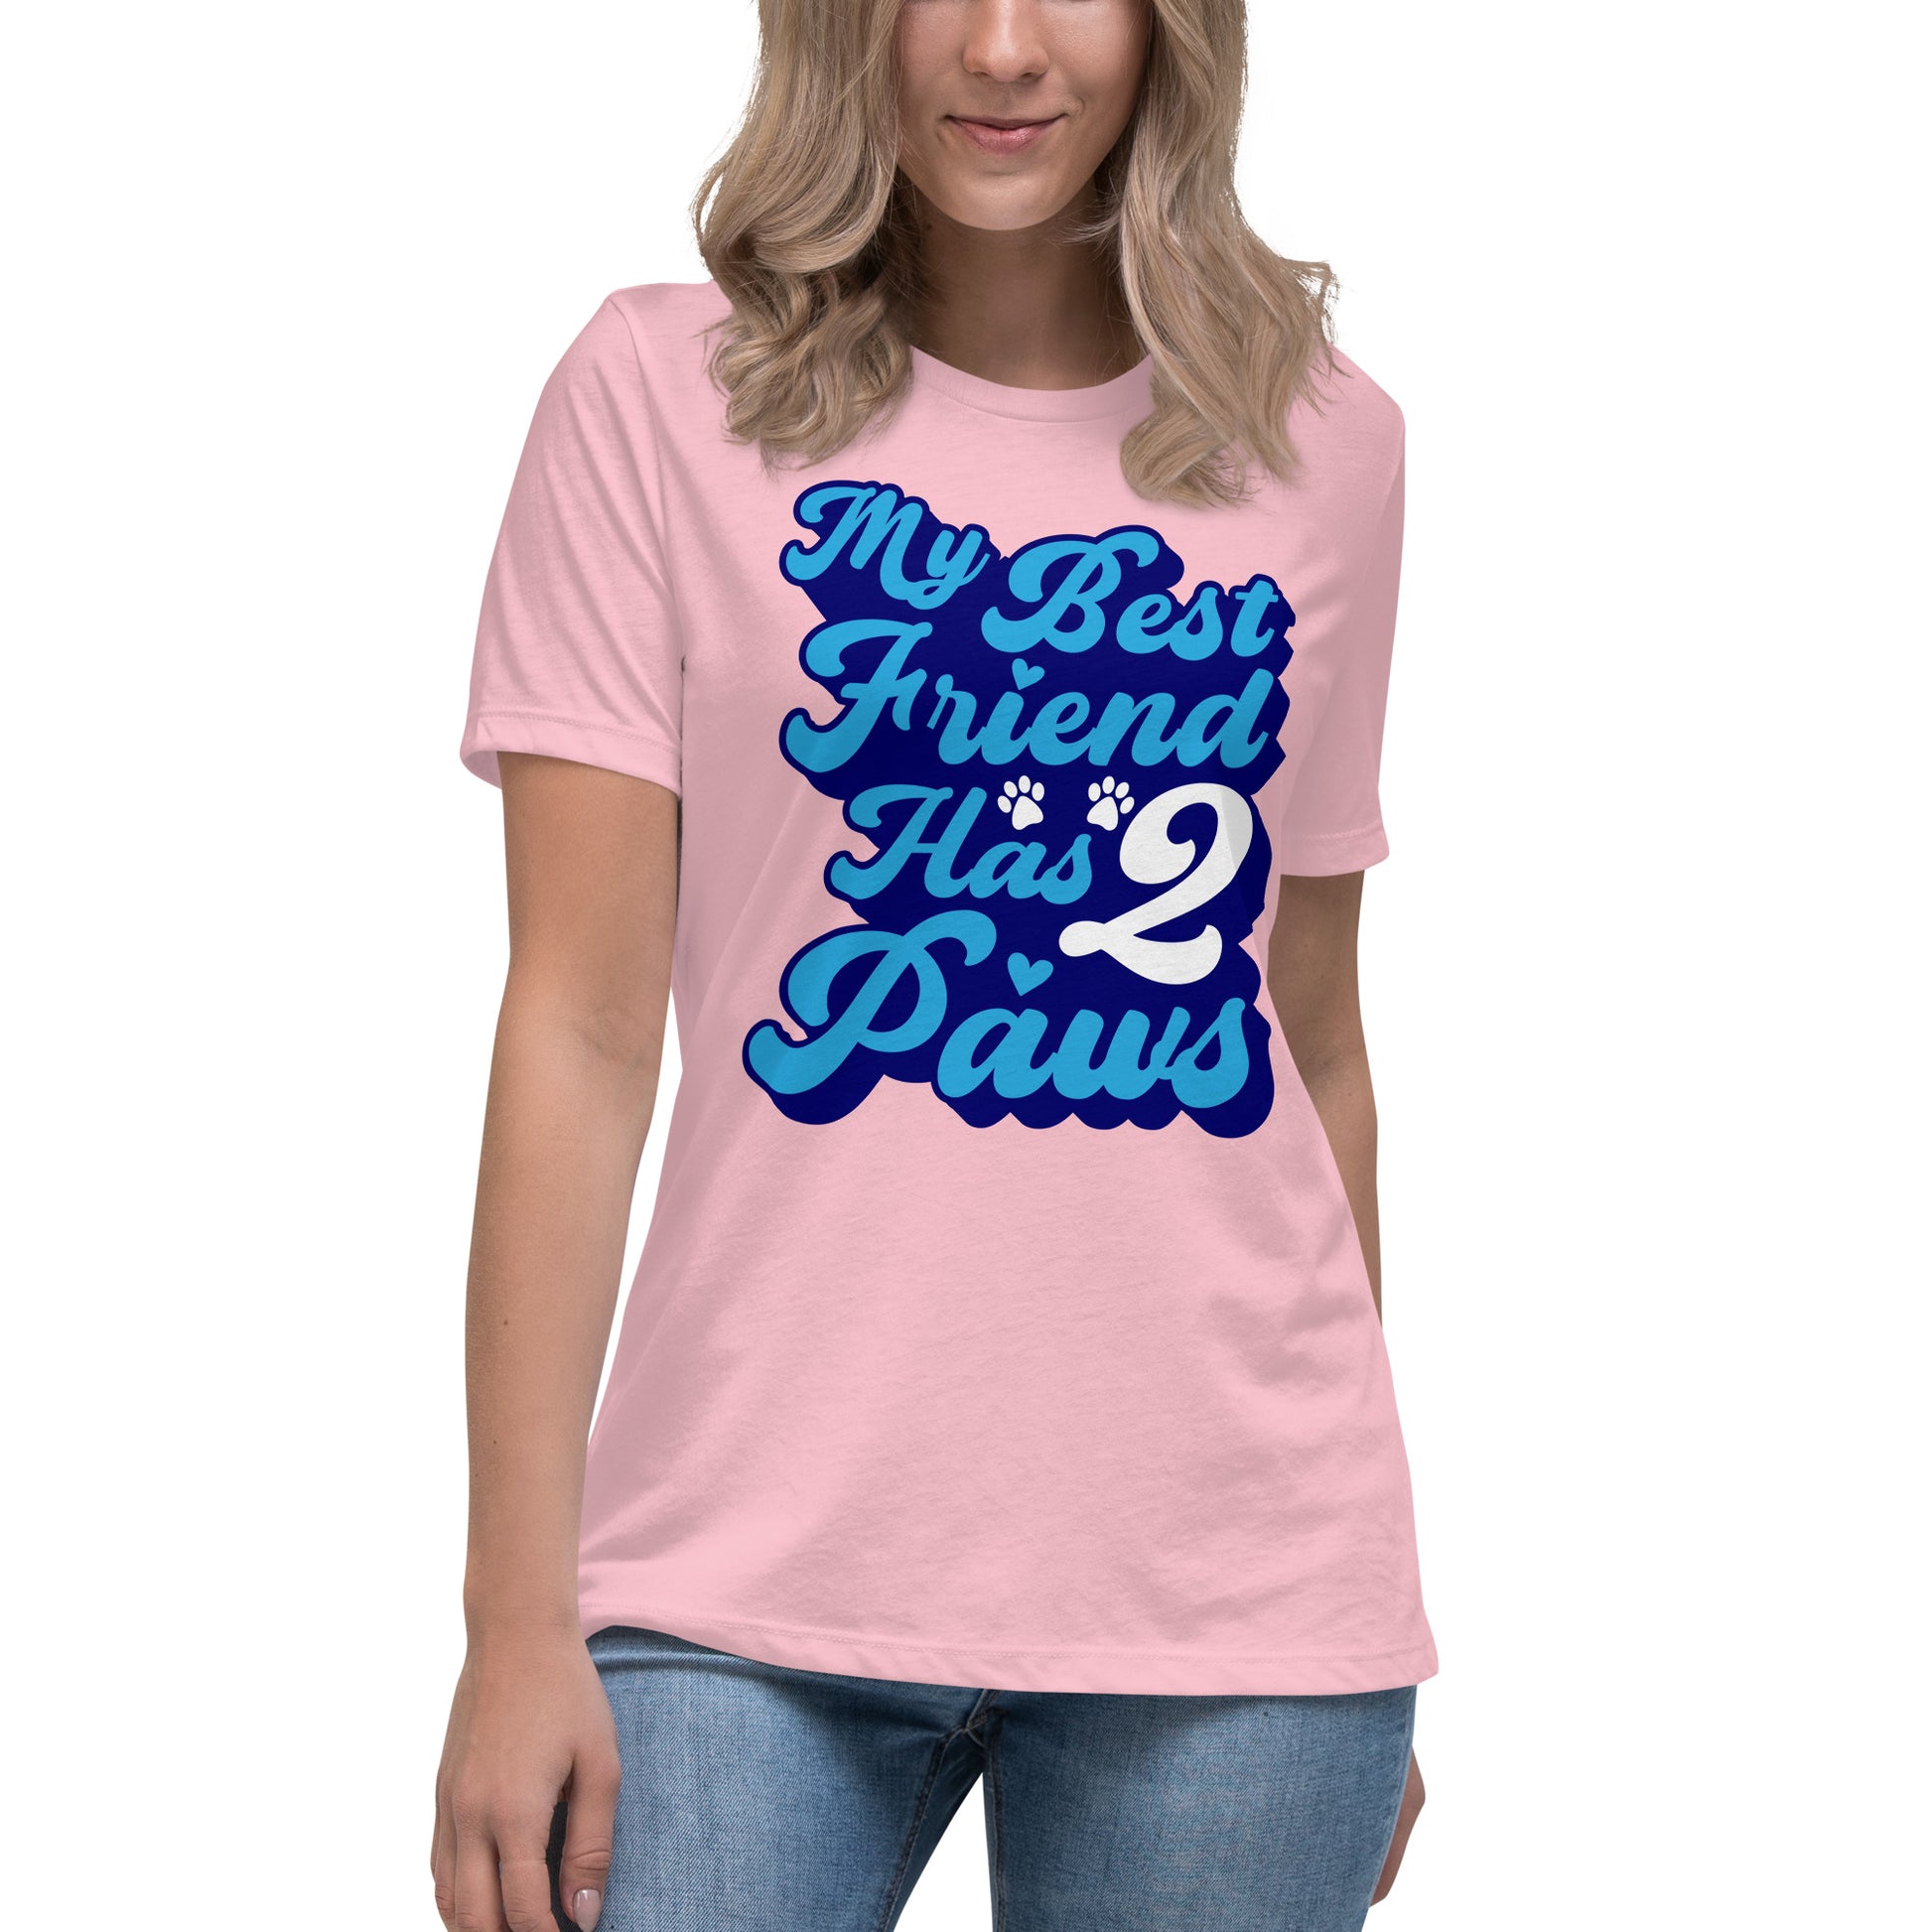 My best friend has 2 Paws women’s relaxed fit t-shirts by Dog Artistry Pink